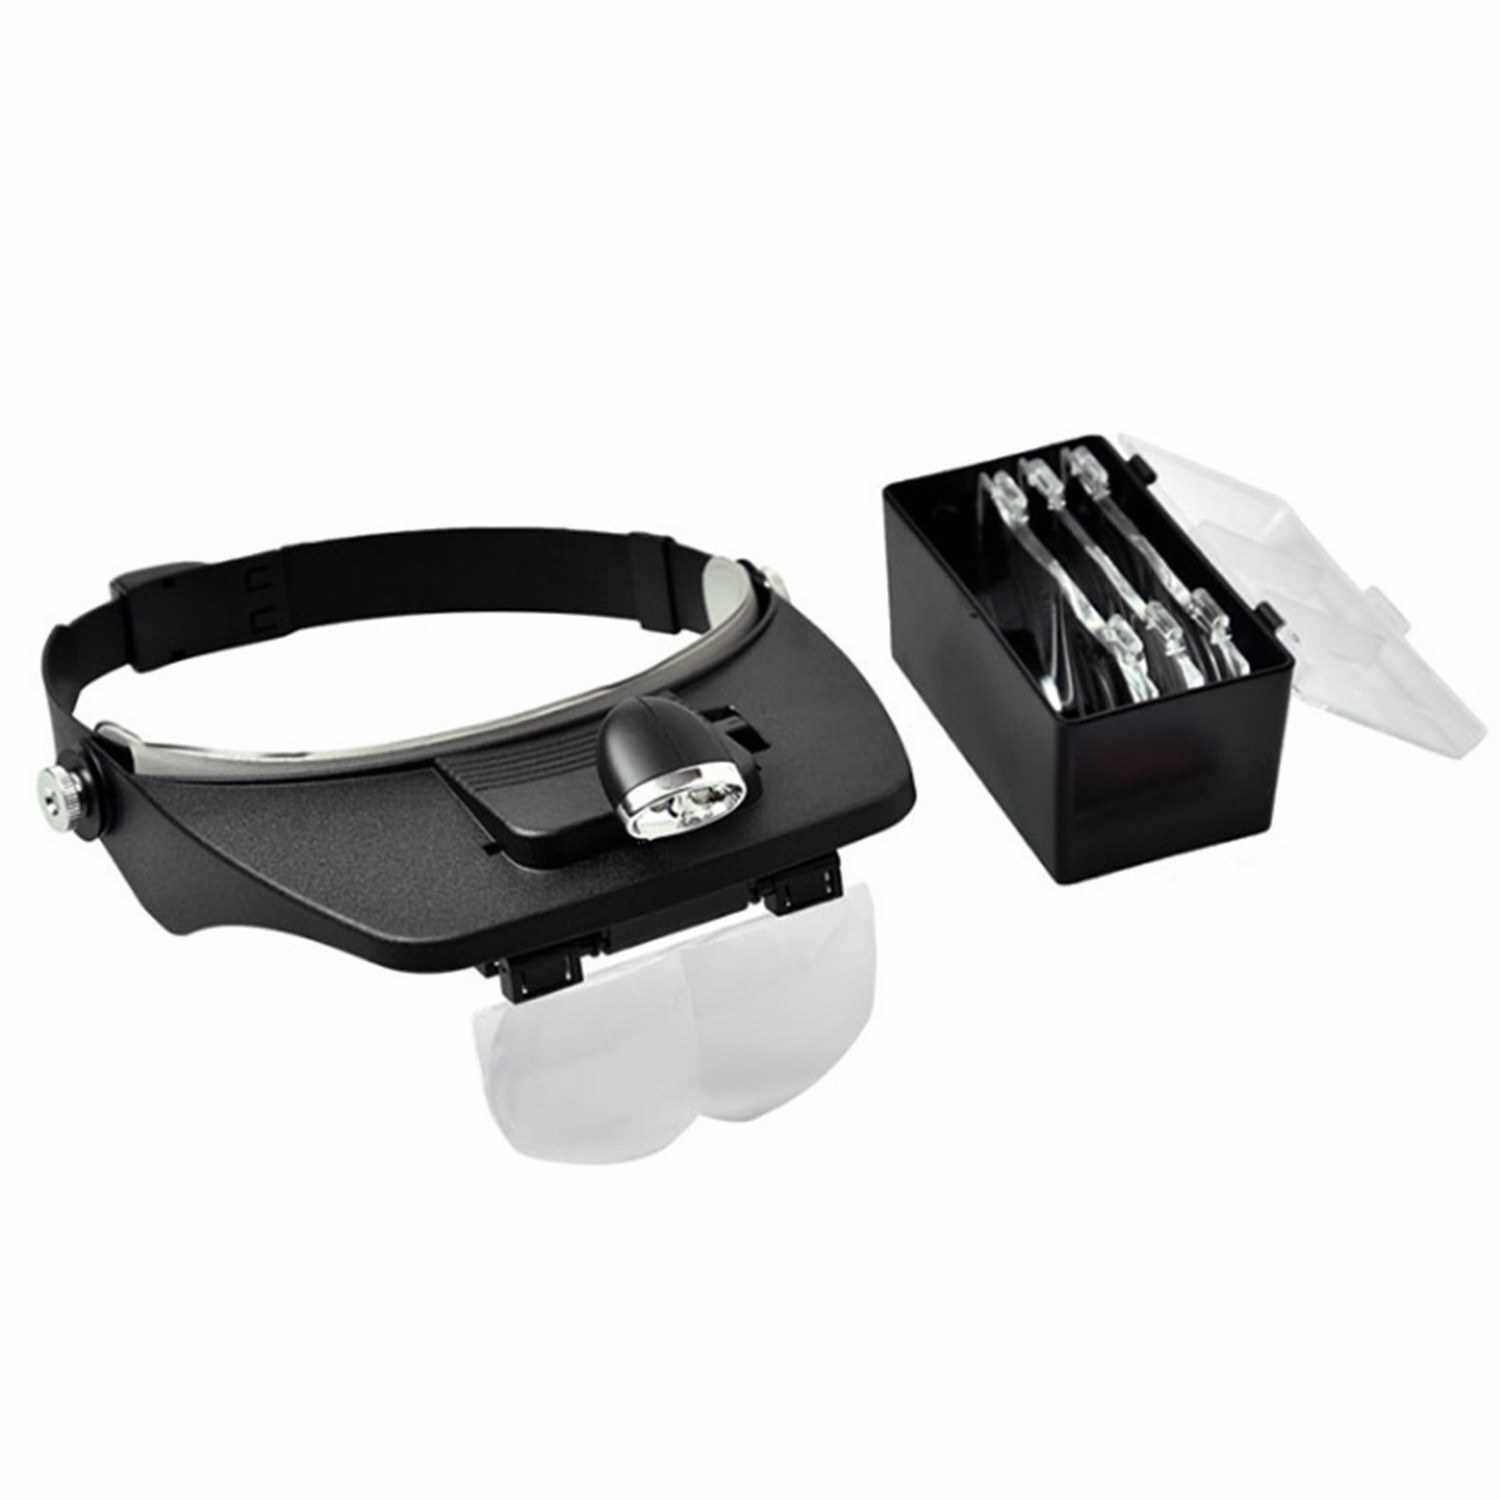 Headband Magnifier Head Magnifying Glasses Hands-Free Optical Professional Head-Worn LED Lighted Magnifier with 4 Detachable Lenses 1.2X 1.8X 2.5X 3.5X for Sewing Crafts Reading (Standard)